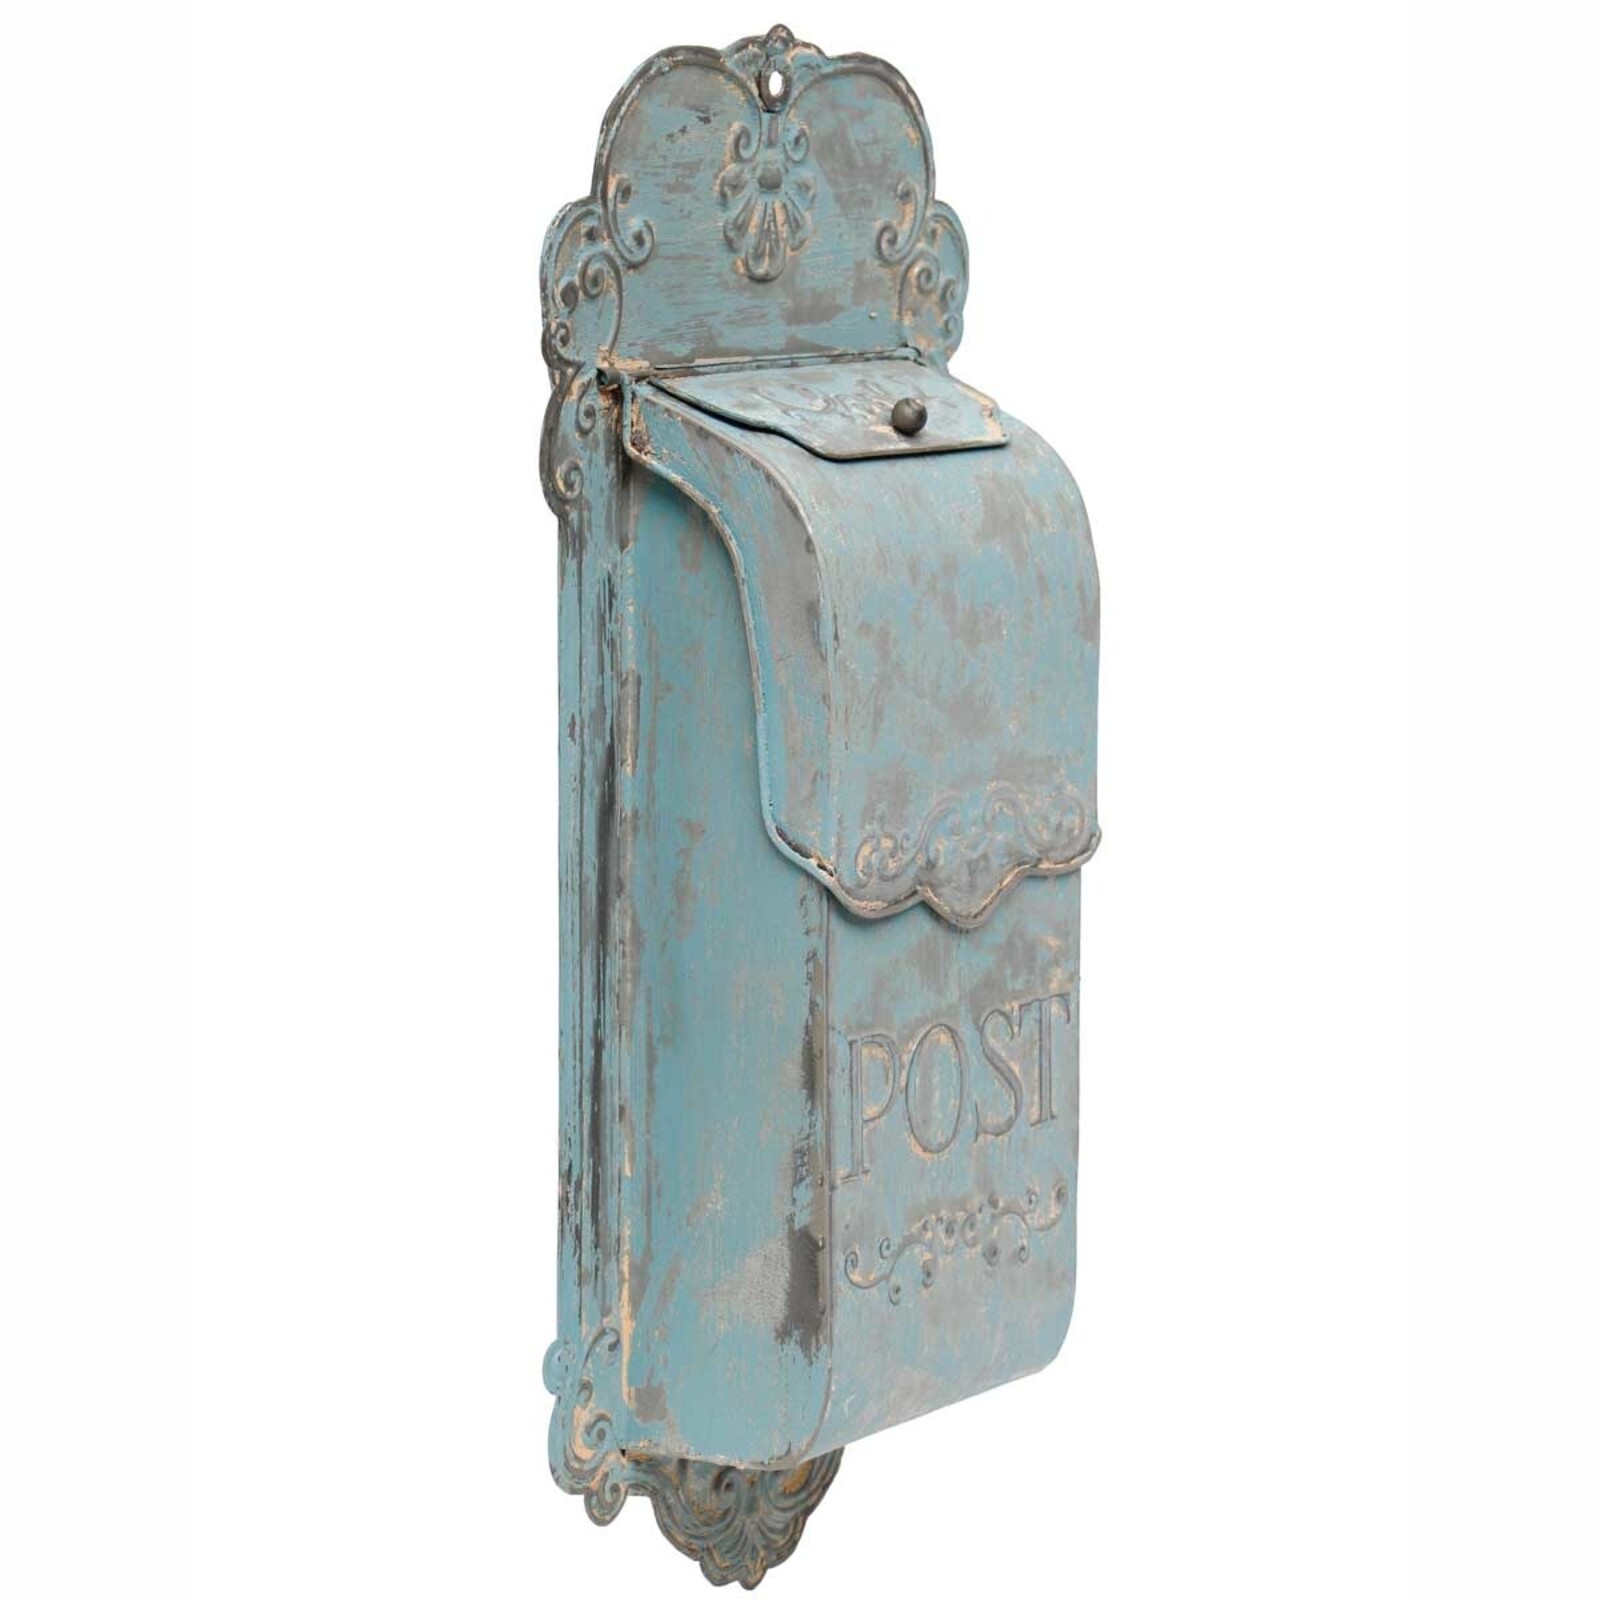 Meravic ANTIQUE BLUE METAL FRENCH SCROLL POSTBOX     A2680 loading=